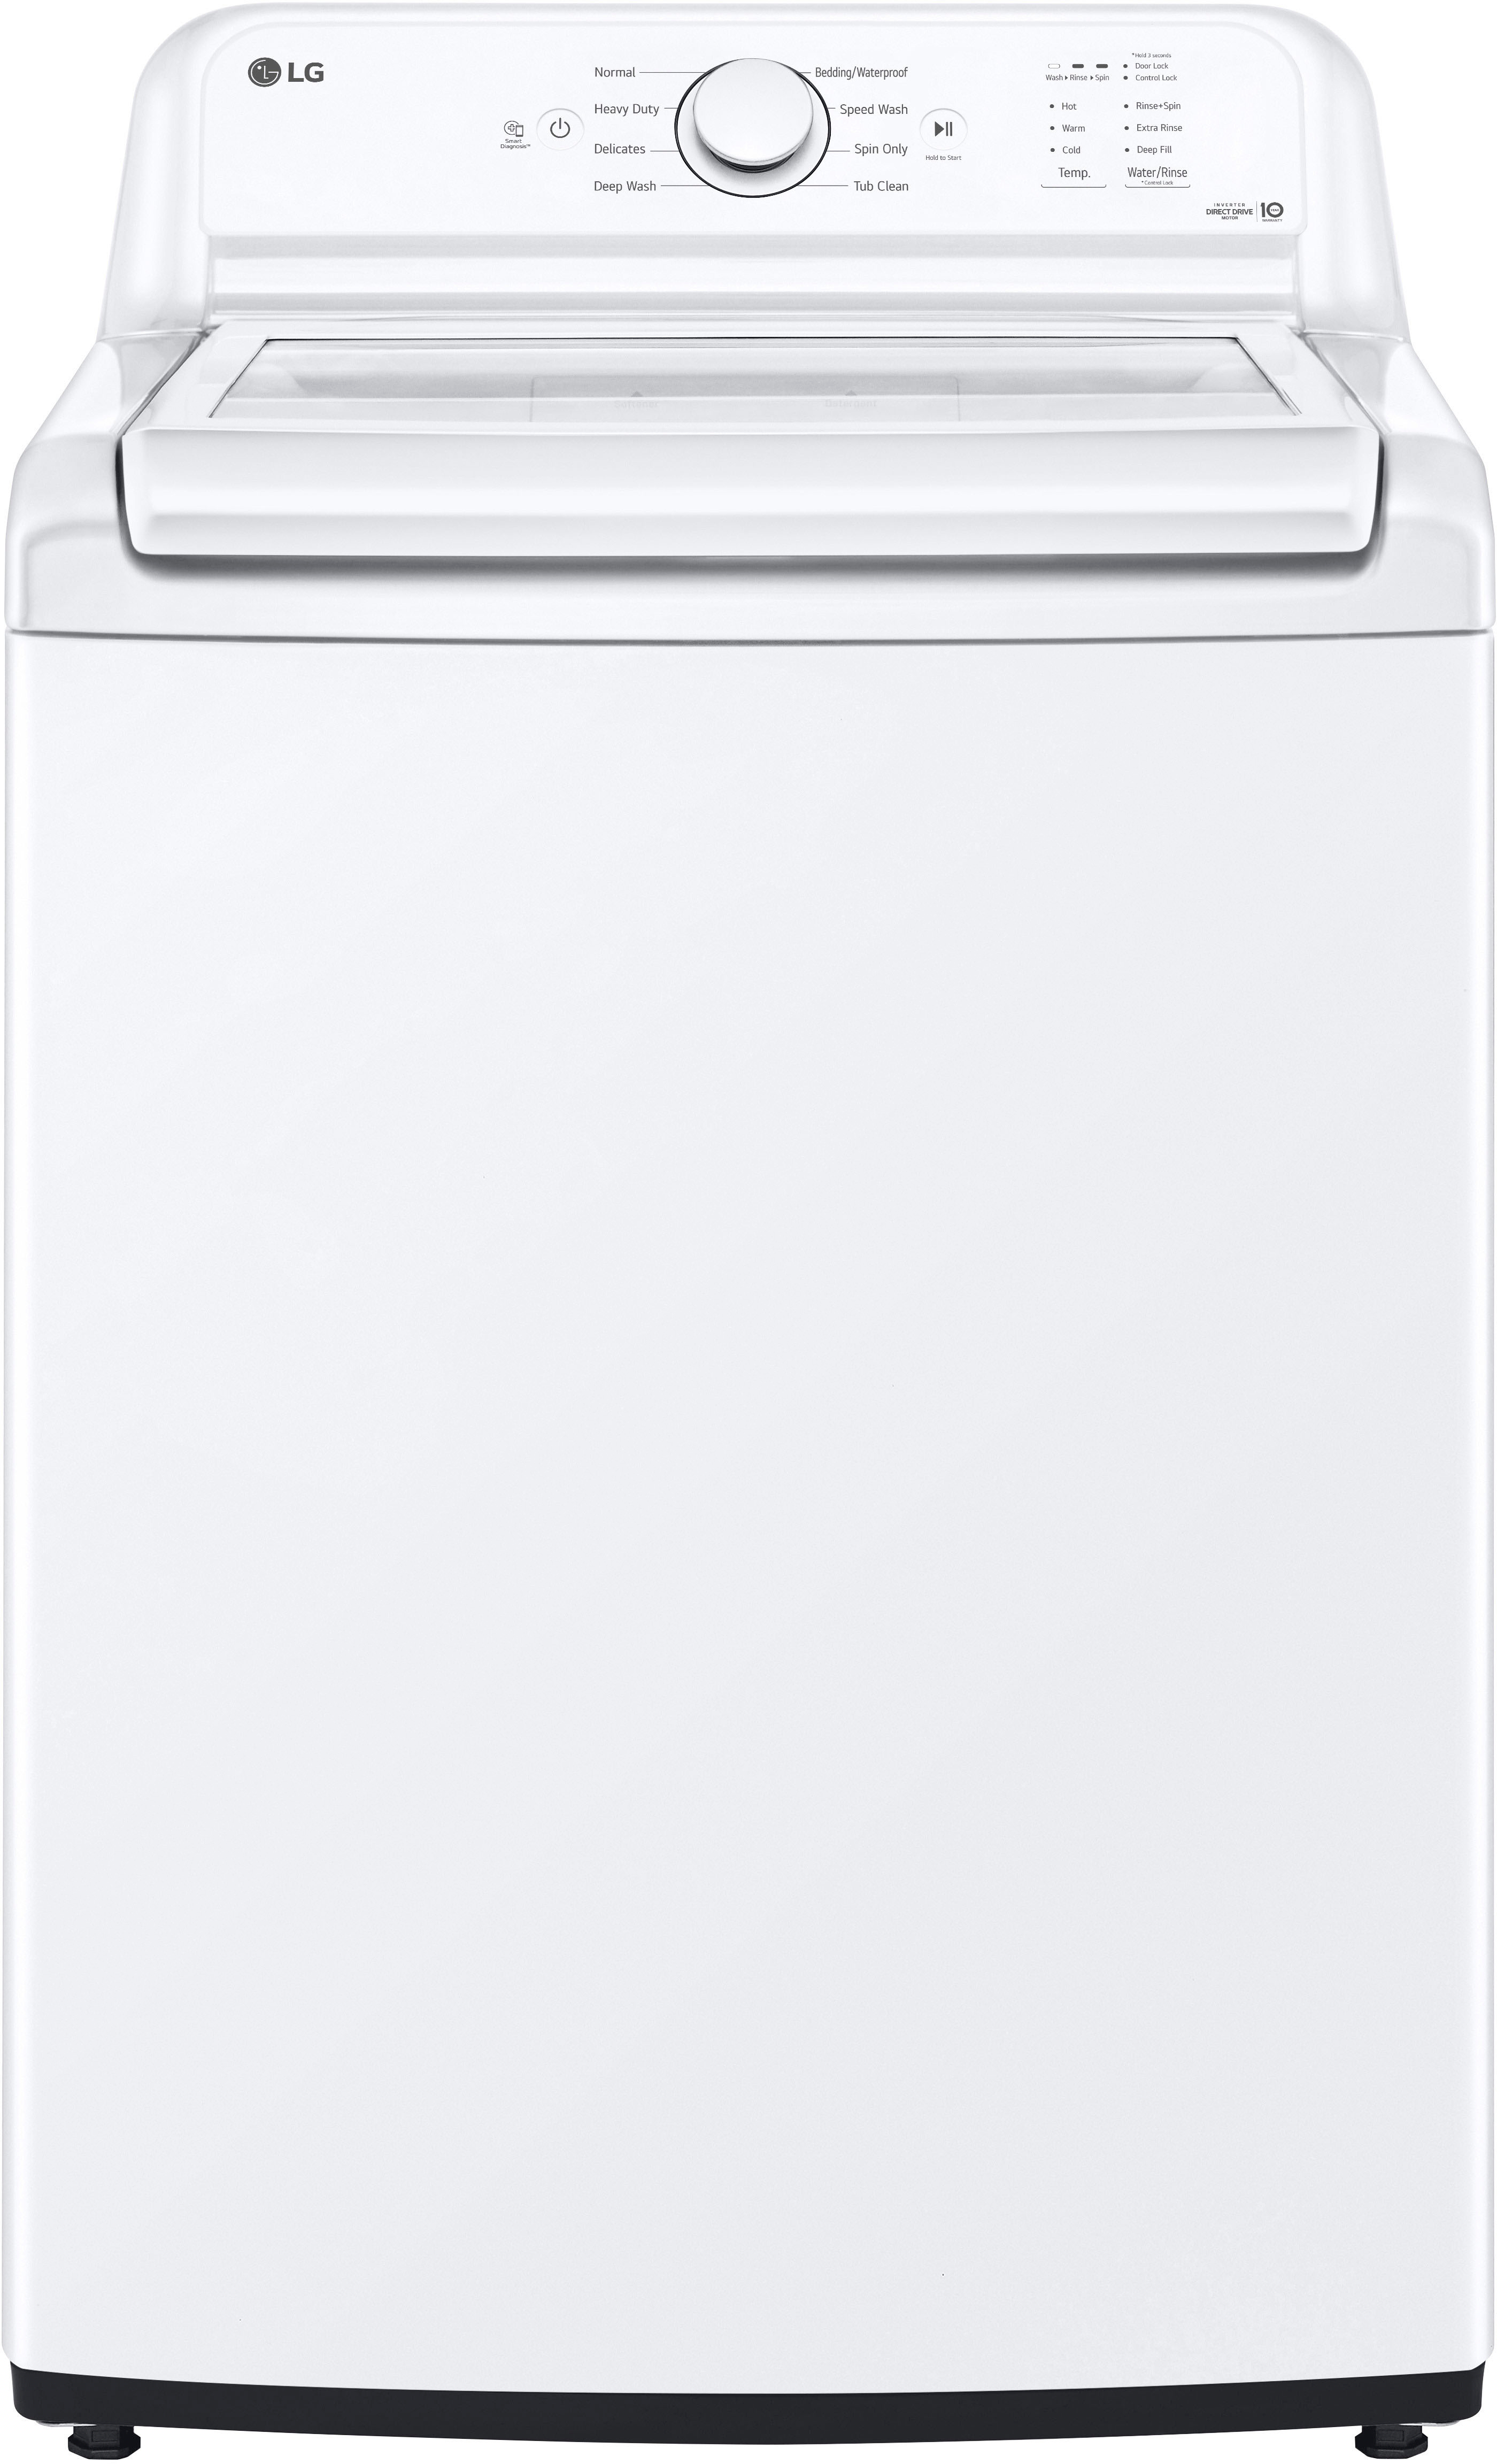 Cu. Top Lid - 4.1 Glass LG WT6105CW Best Load SlamProof with Washer Buy White Ft.